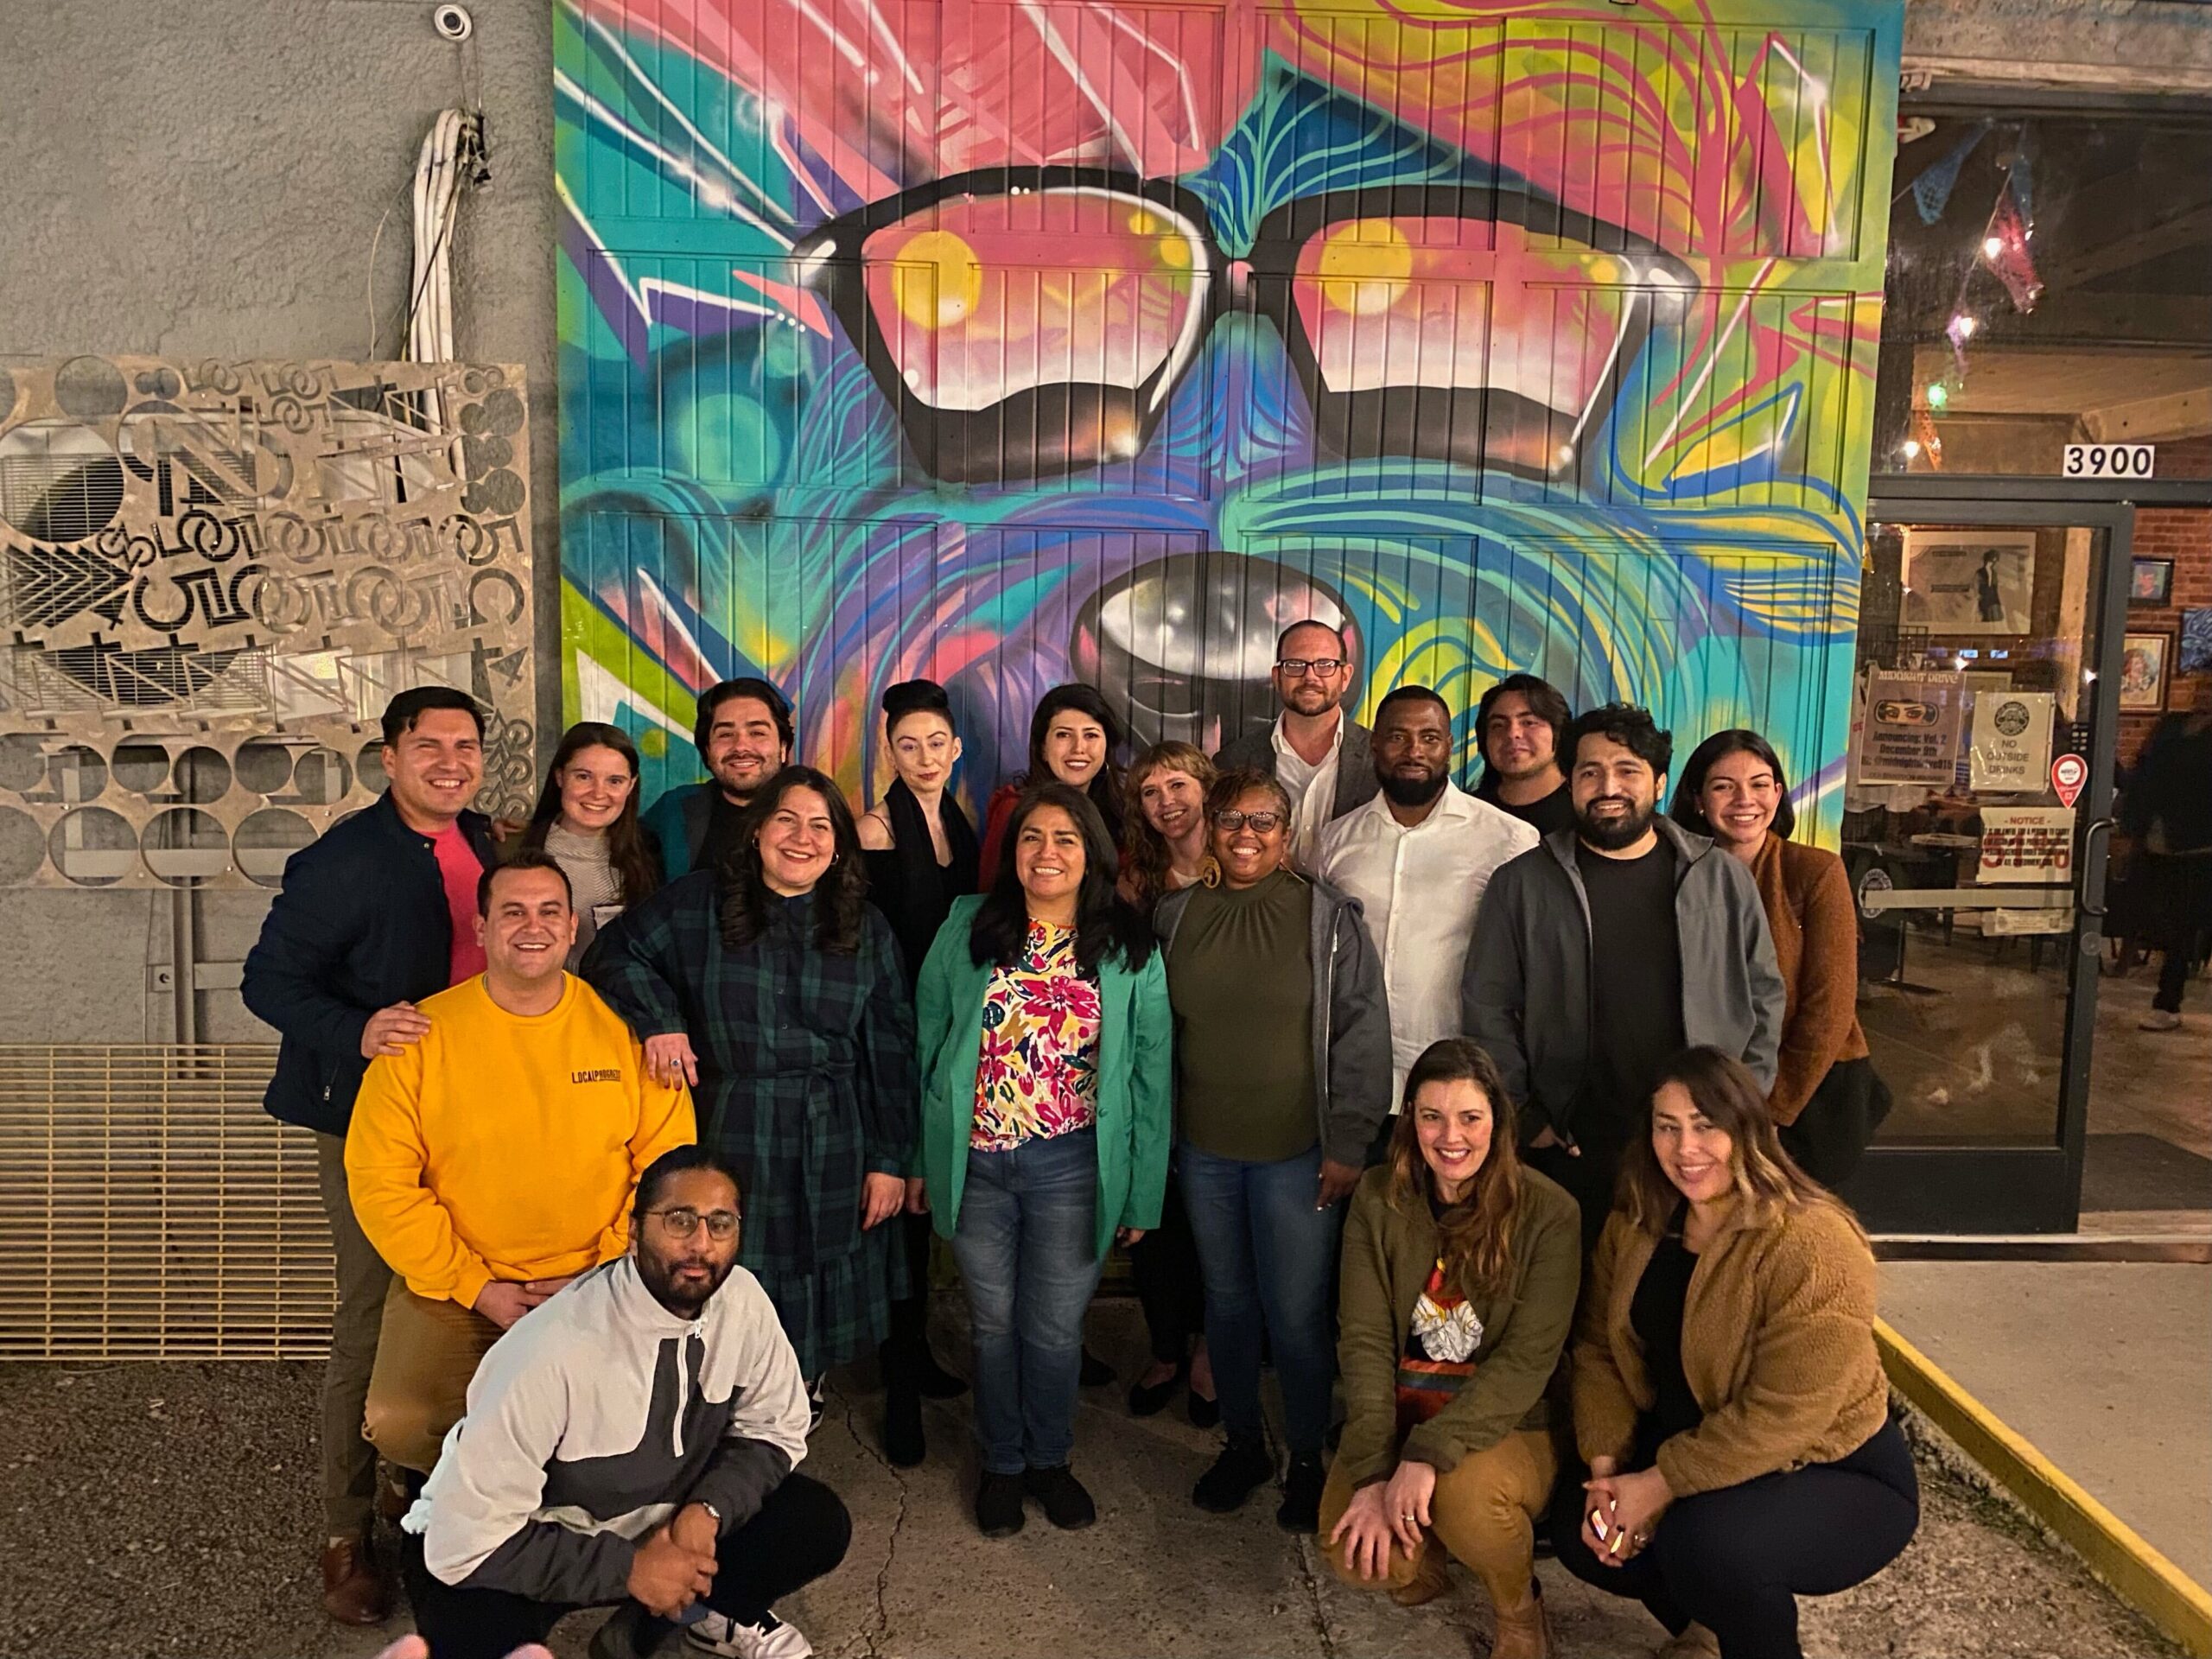 LPTX members and partners posing together in front of a mural in El Paso, Texas.